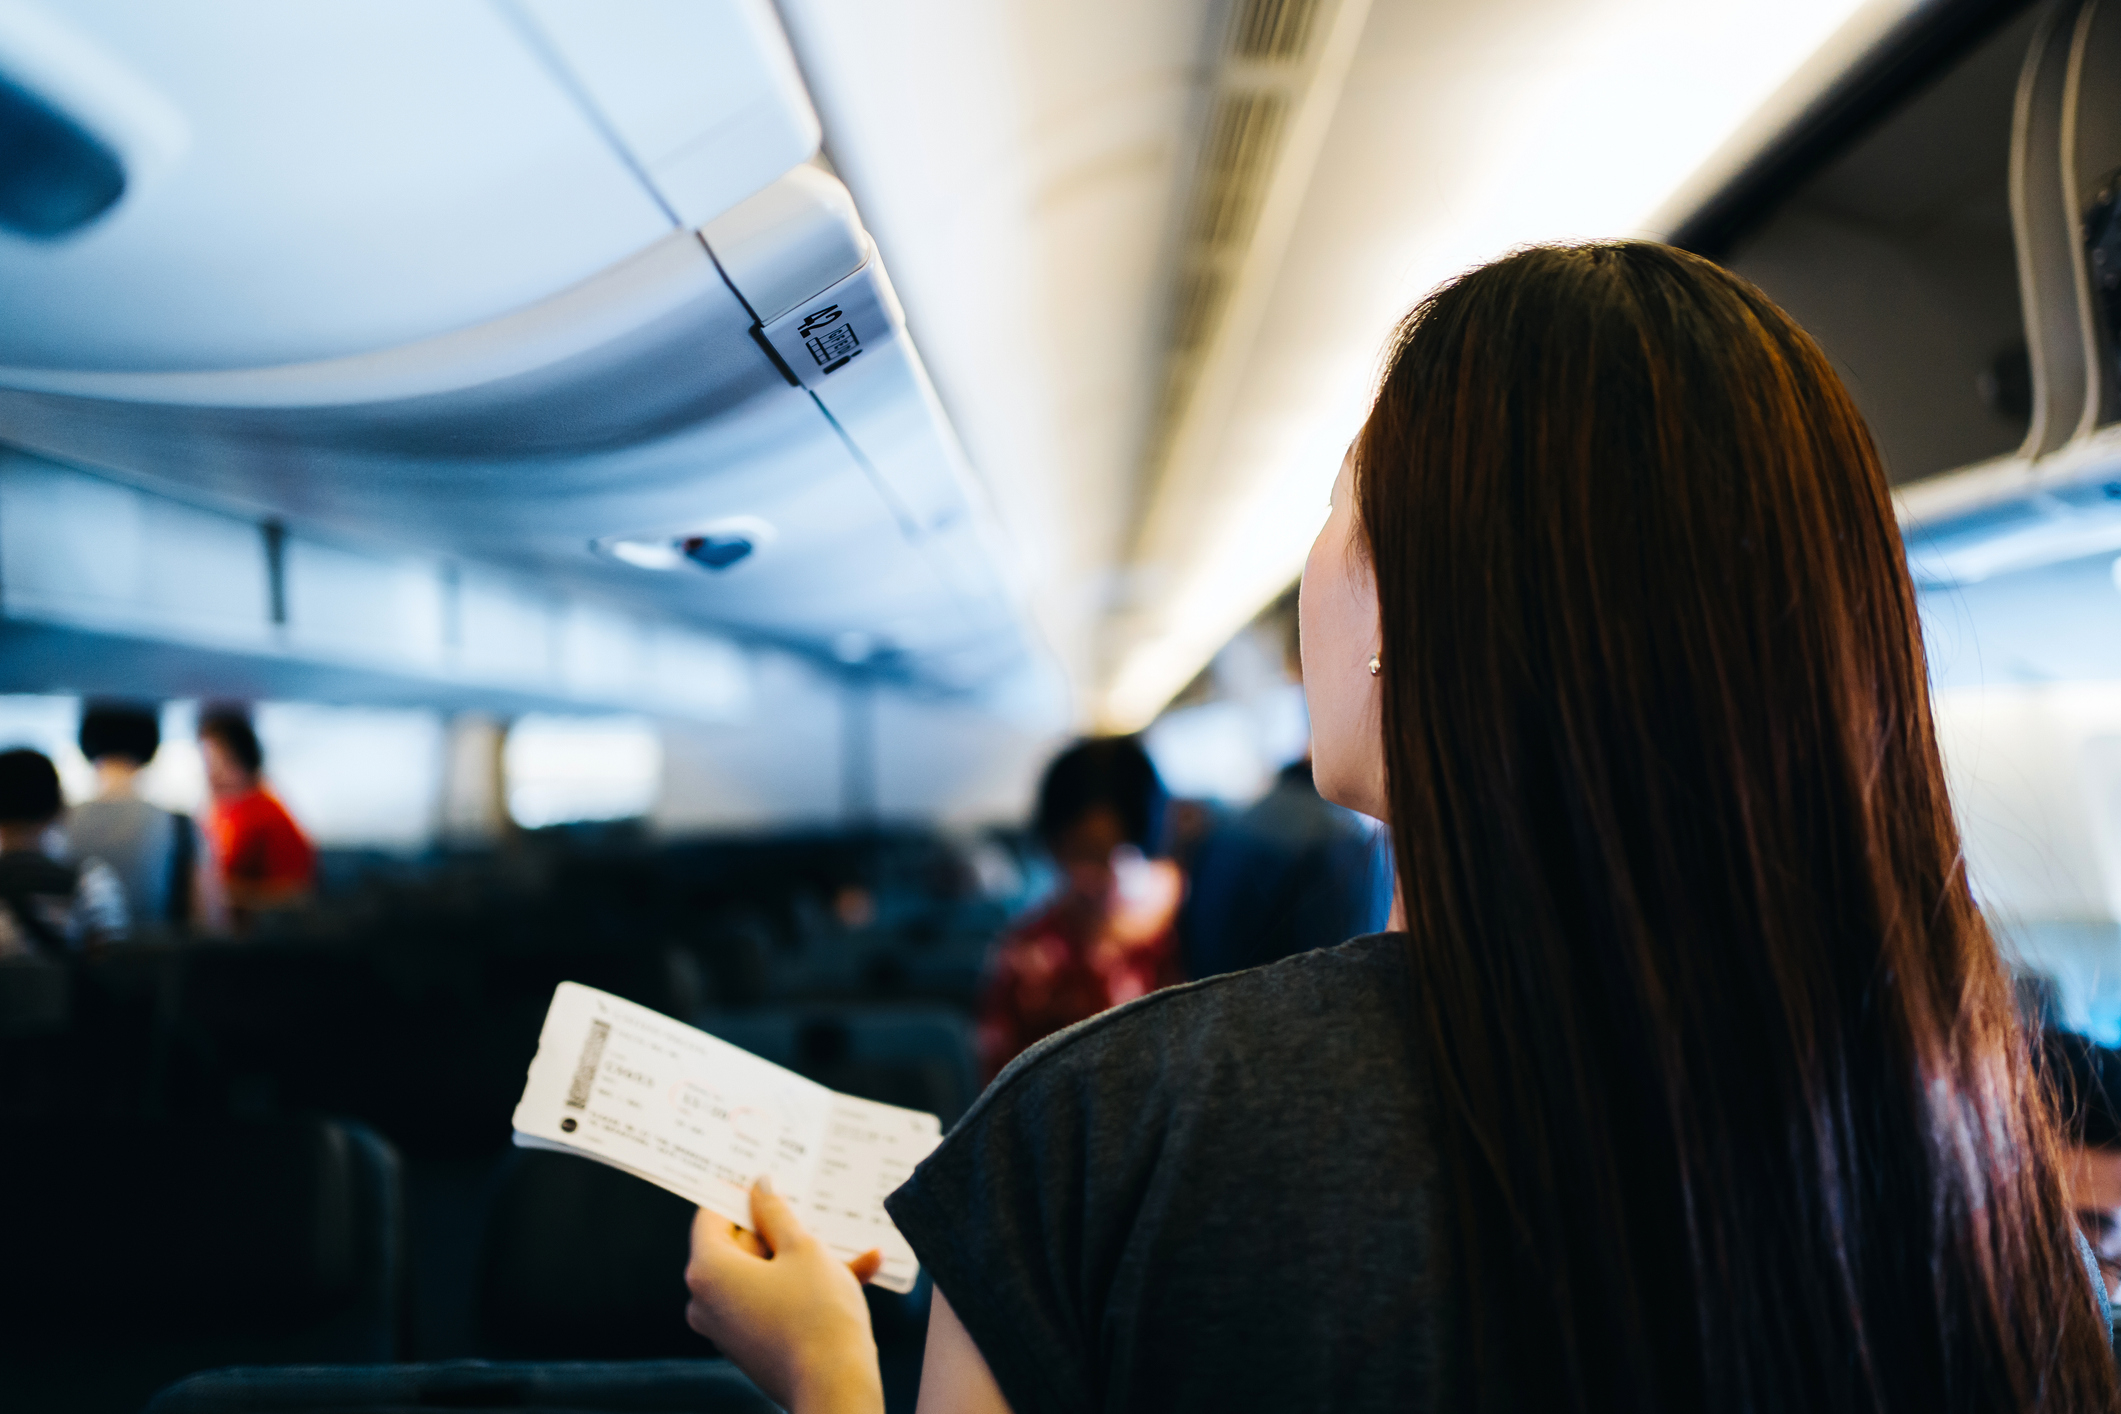 Woman inside an airplane looking at her seat ticket with passengers in the background